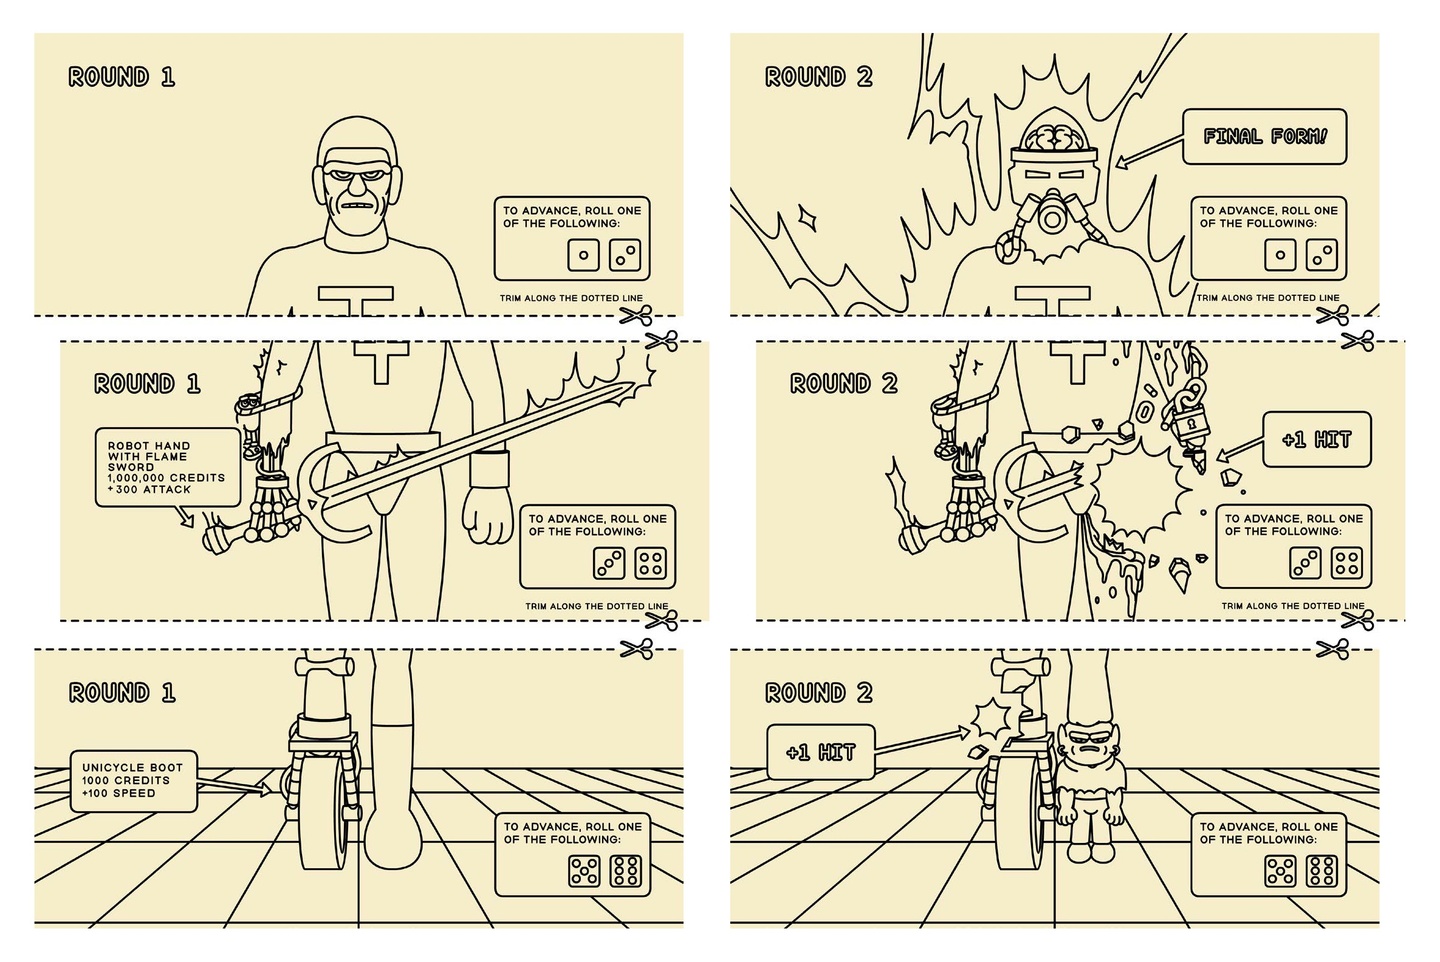 Sample uncolored pages from Paper Fight in three sections - head, torso, and legs of the fighter. Different pages show upgrades being made to armor or hits being taken and parts of the fighter being destroyed.